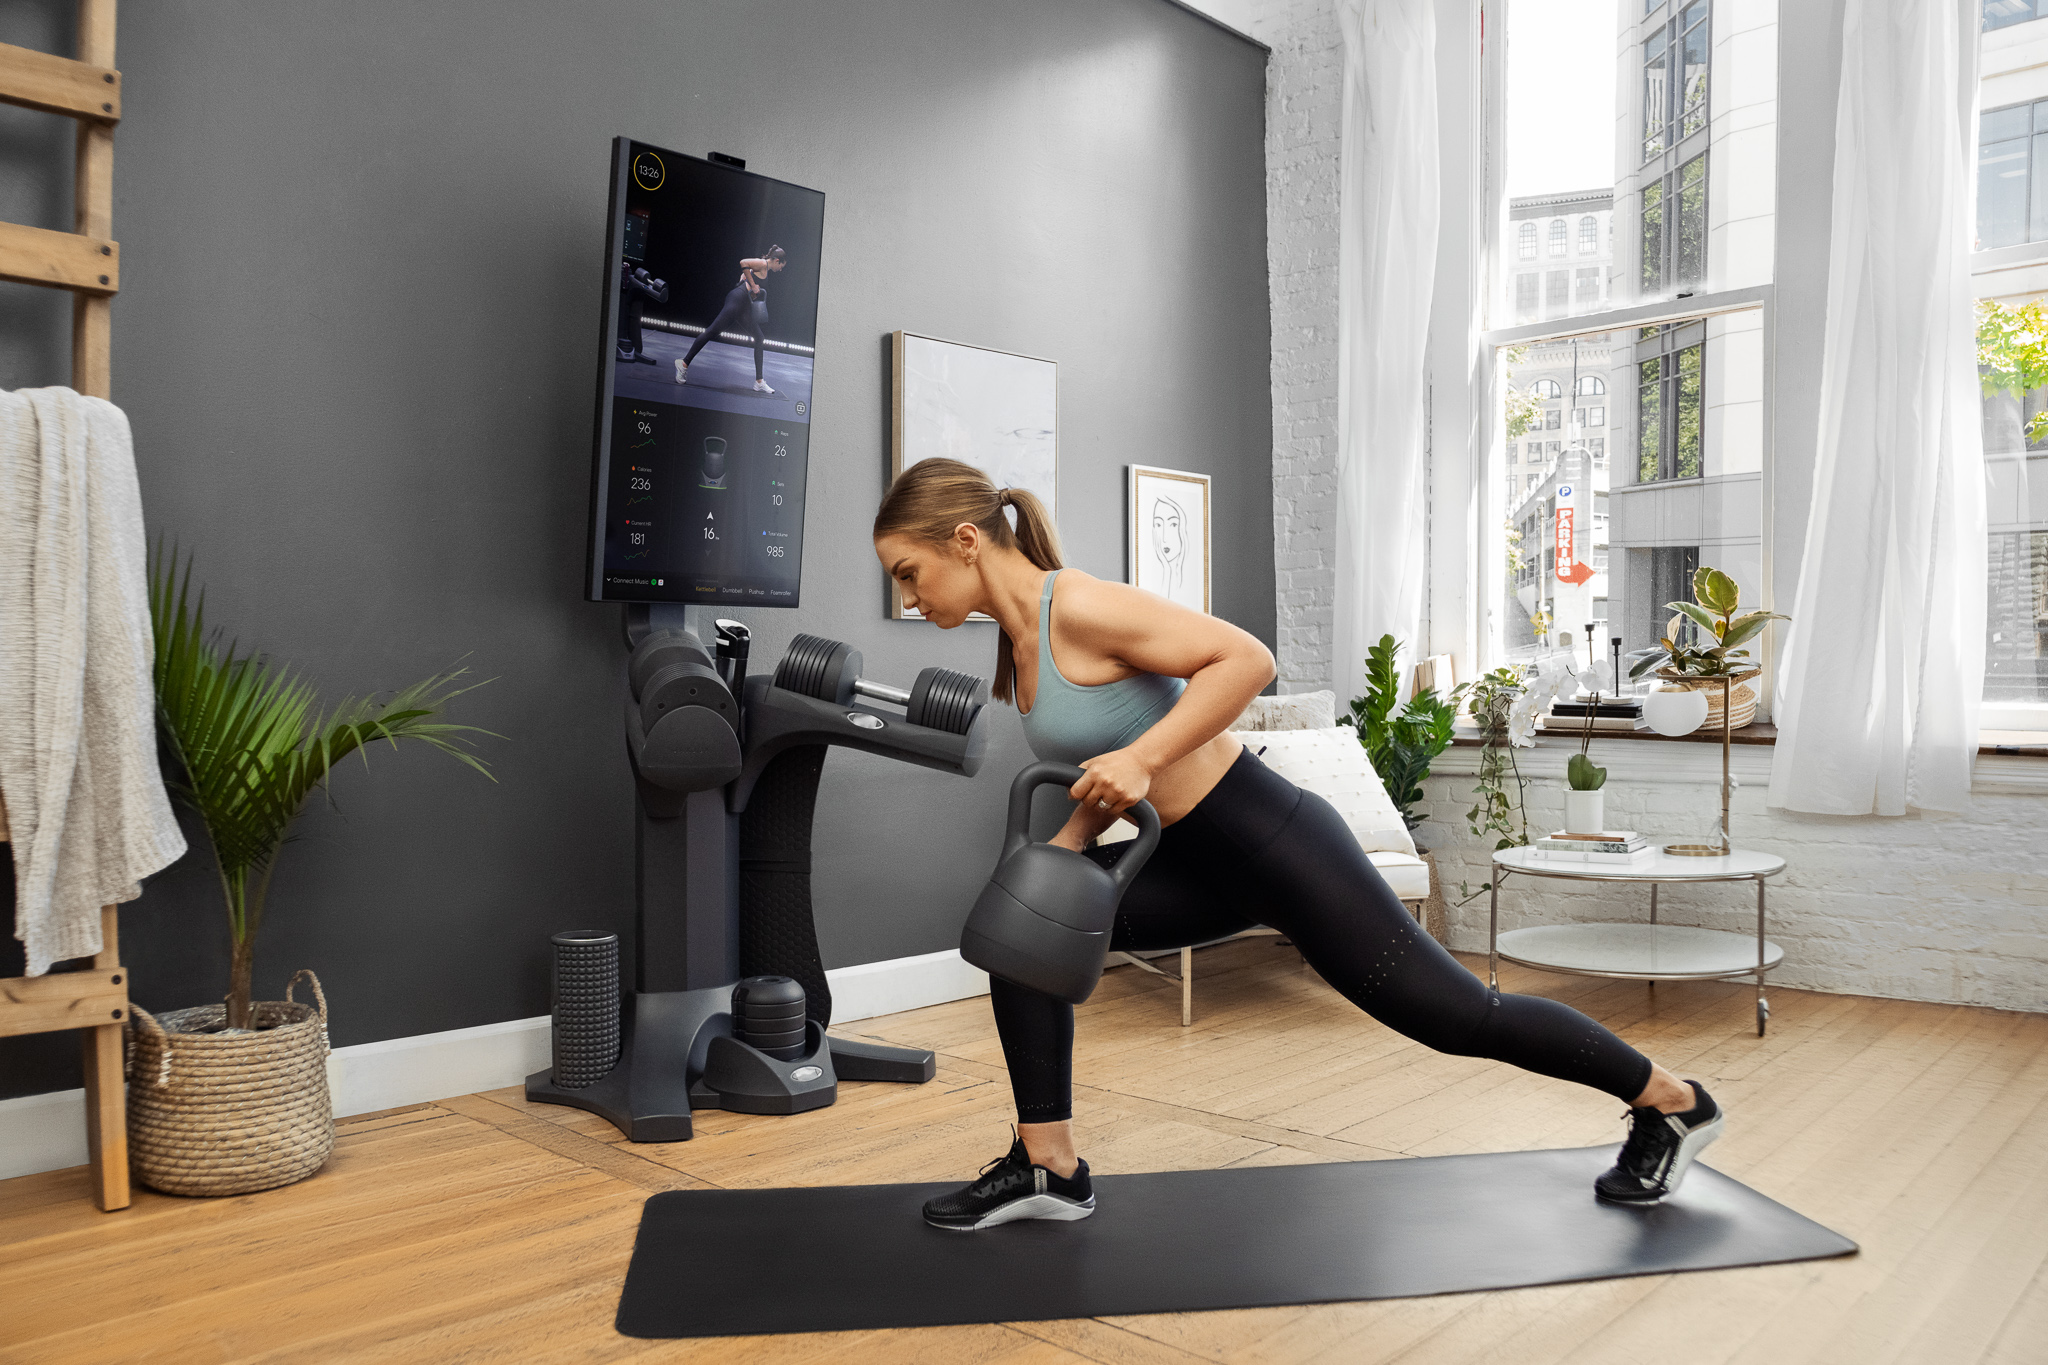 A person with a futuristic home gym